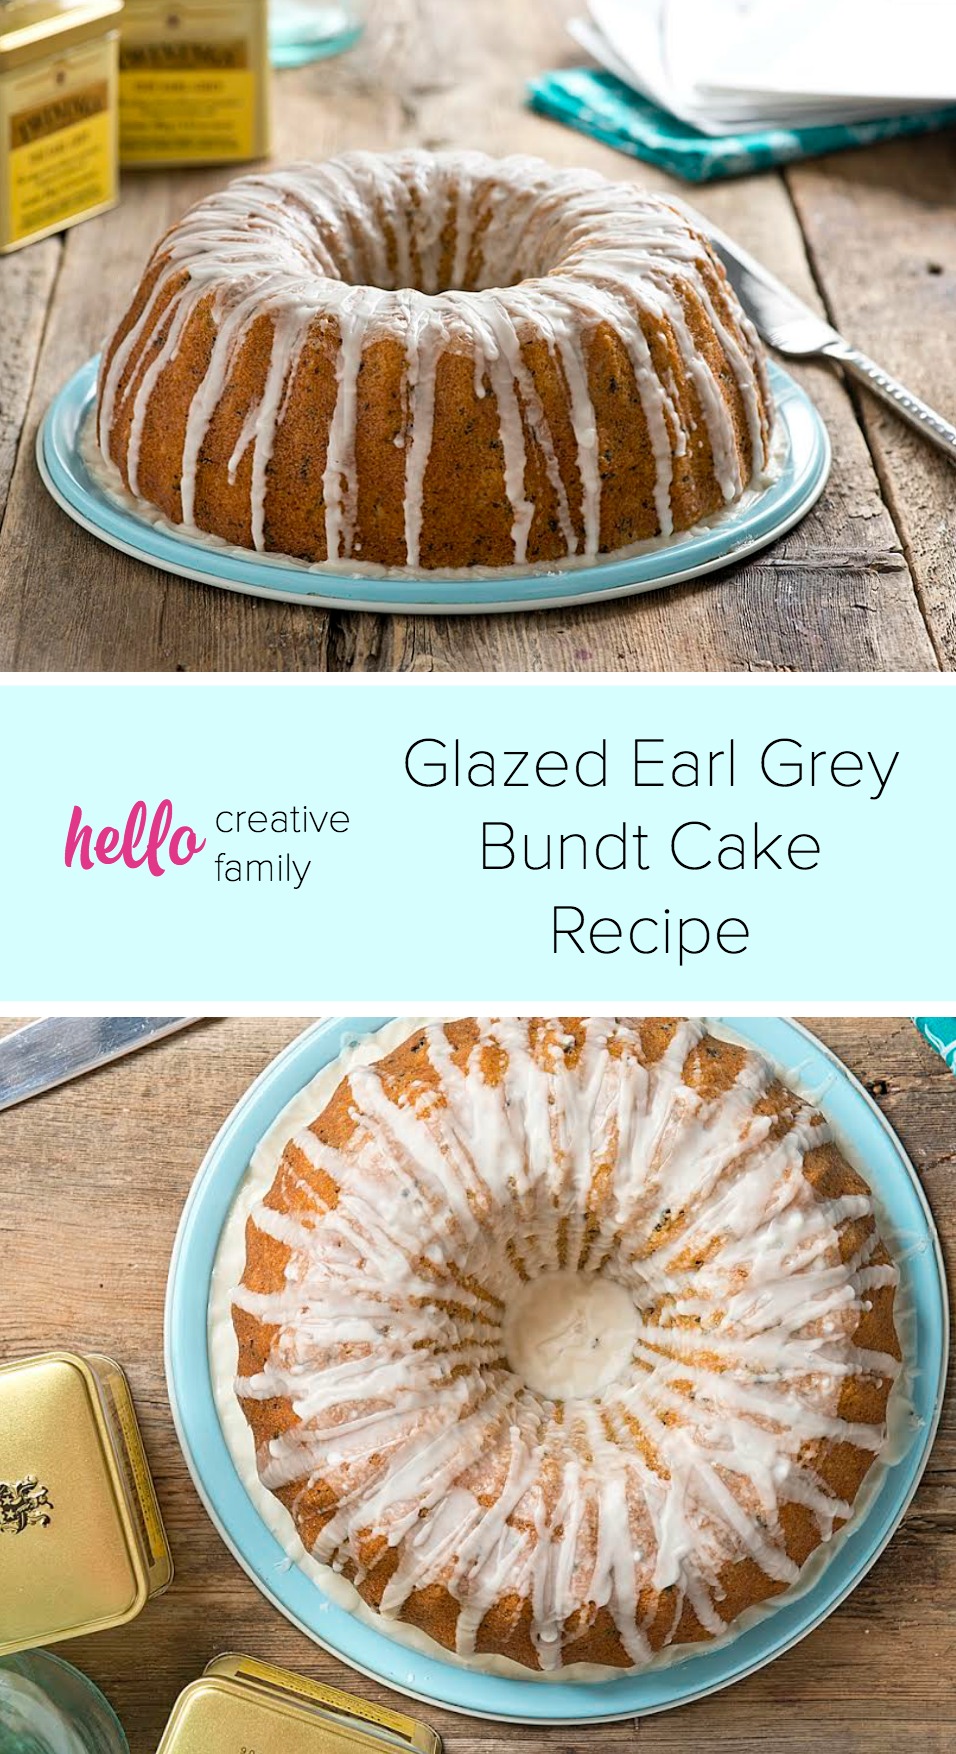 Making a show stopping dessert at home is easy, with the right recipe! Steeped loose leaf Earl Grey tea gives this Glazed Earl Grey Bundt Cake Recipe an incredibly moist and distinct flavor. The perfect dessert for a tea party or for entertaining guests!